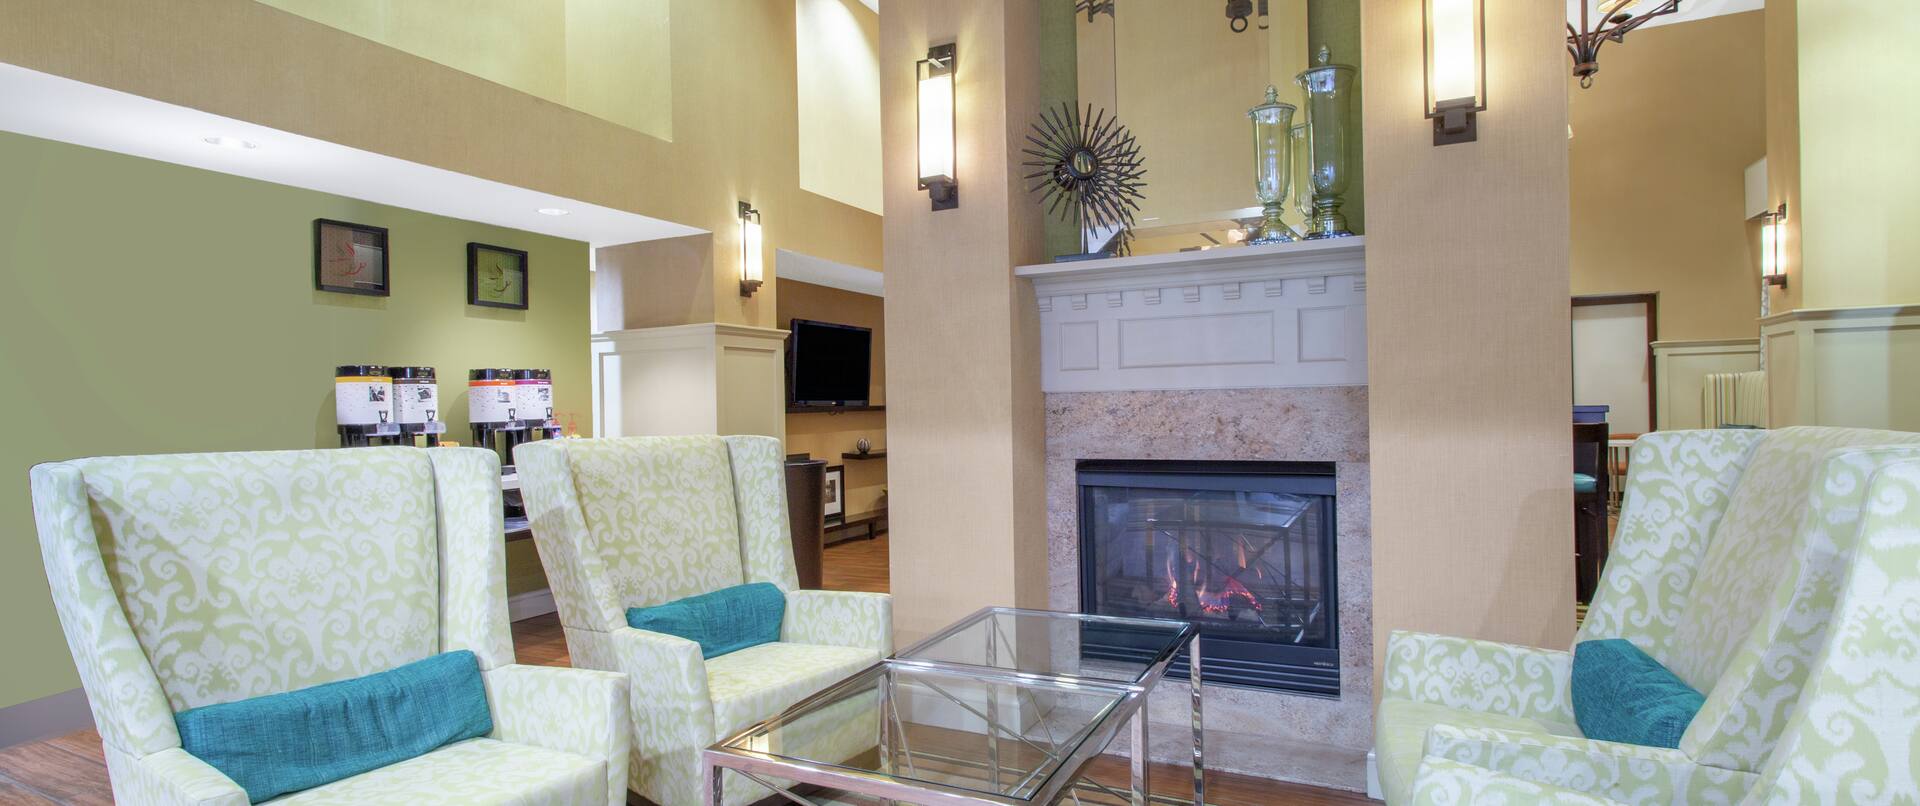 Lobby Seating With Fireplace